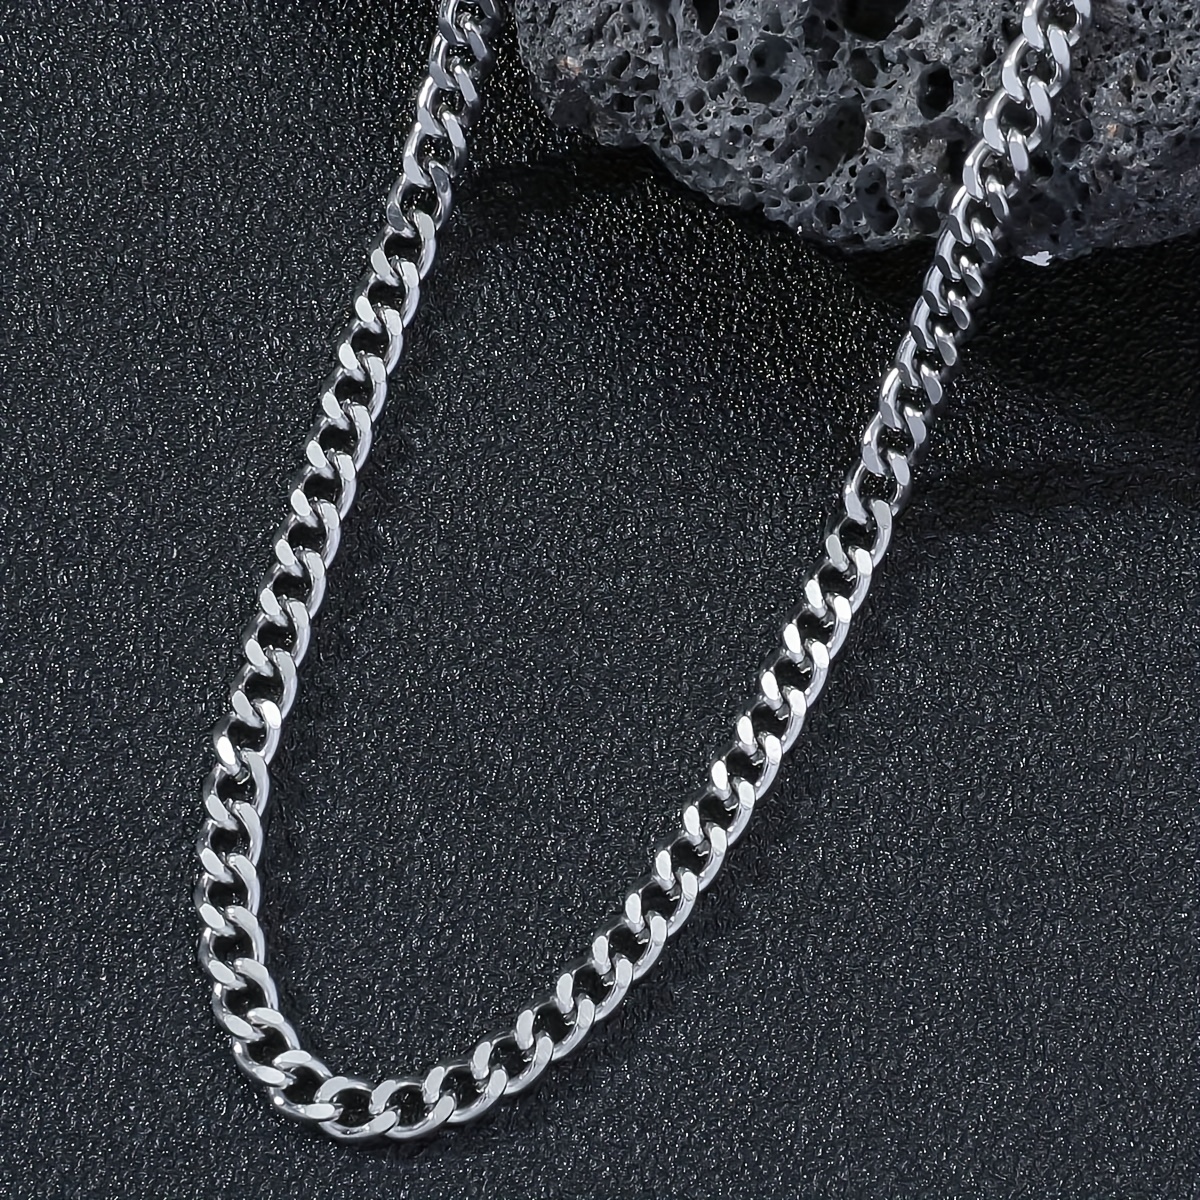 Stainless Chain Necklace for Men Women Link Chain Black Gold Silver Color  Punk Choker Fashion Male Jewelry Gift Black 3mm x 50cm 